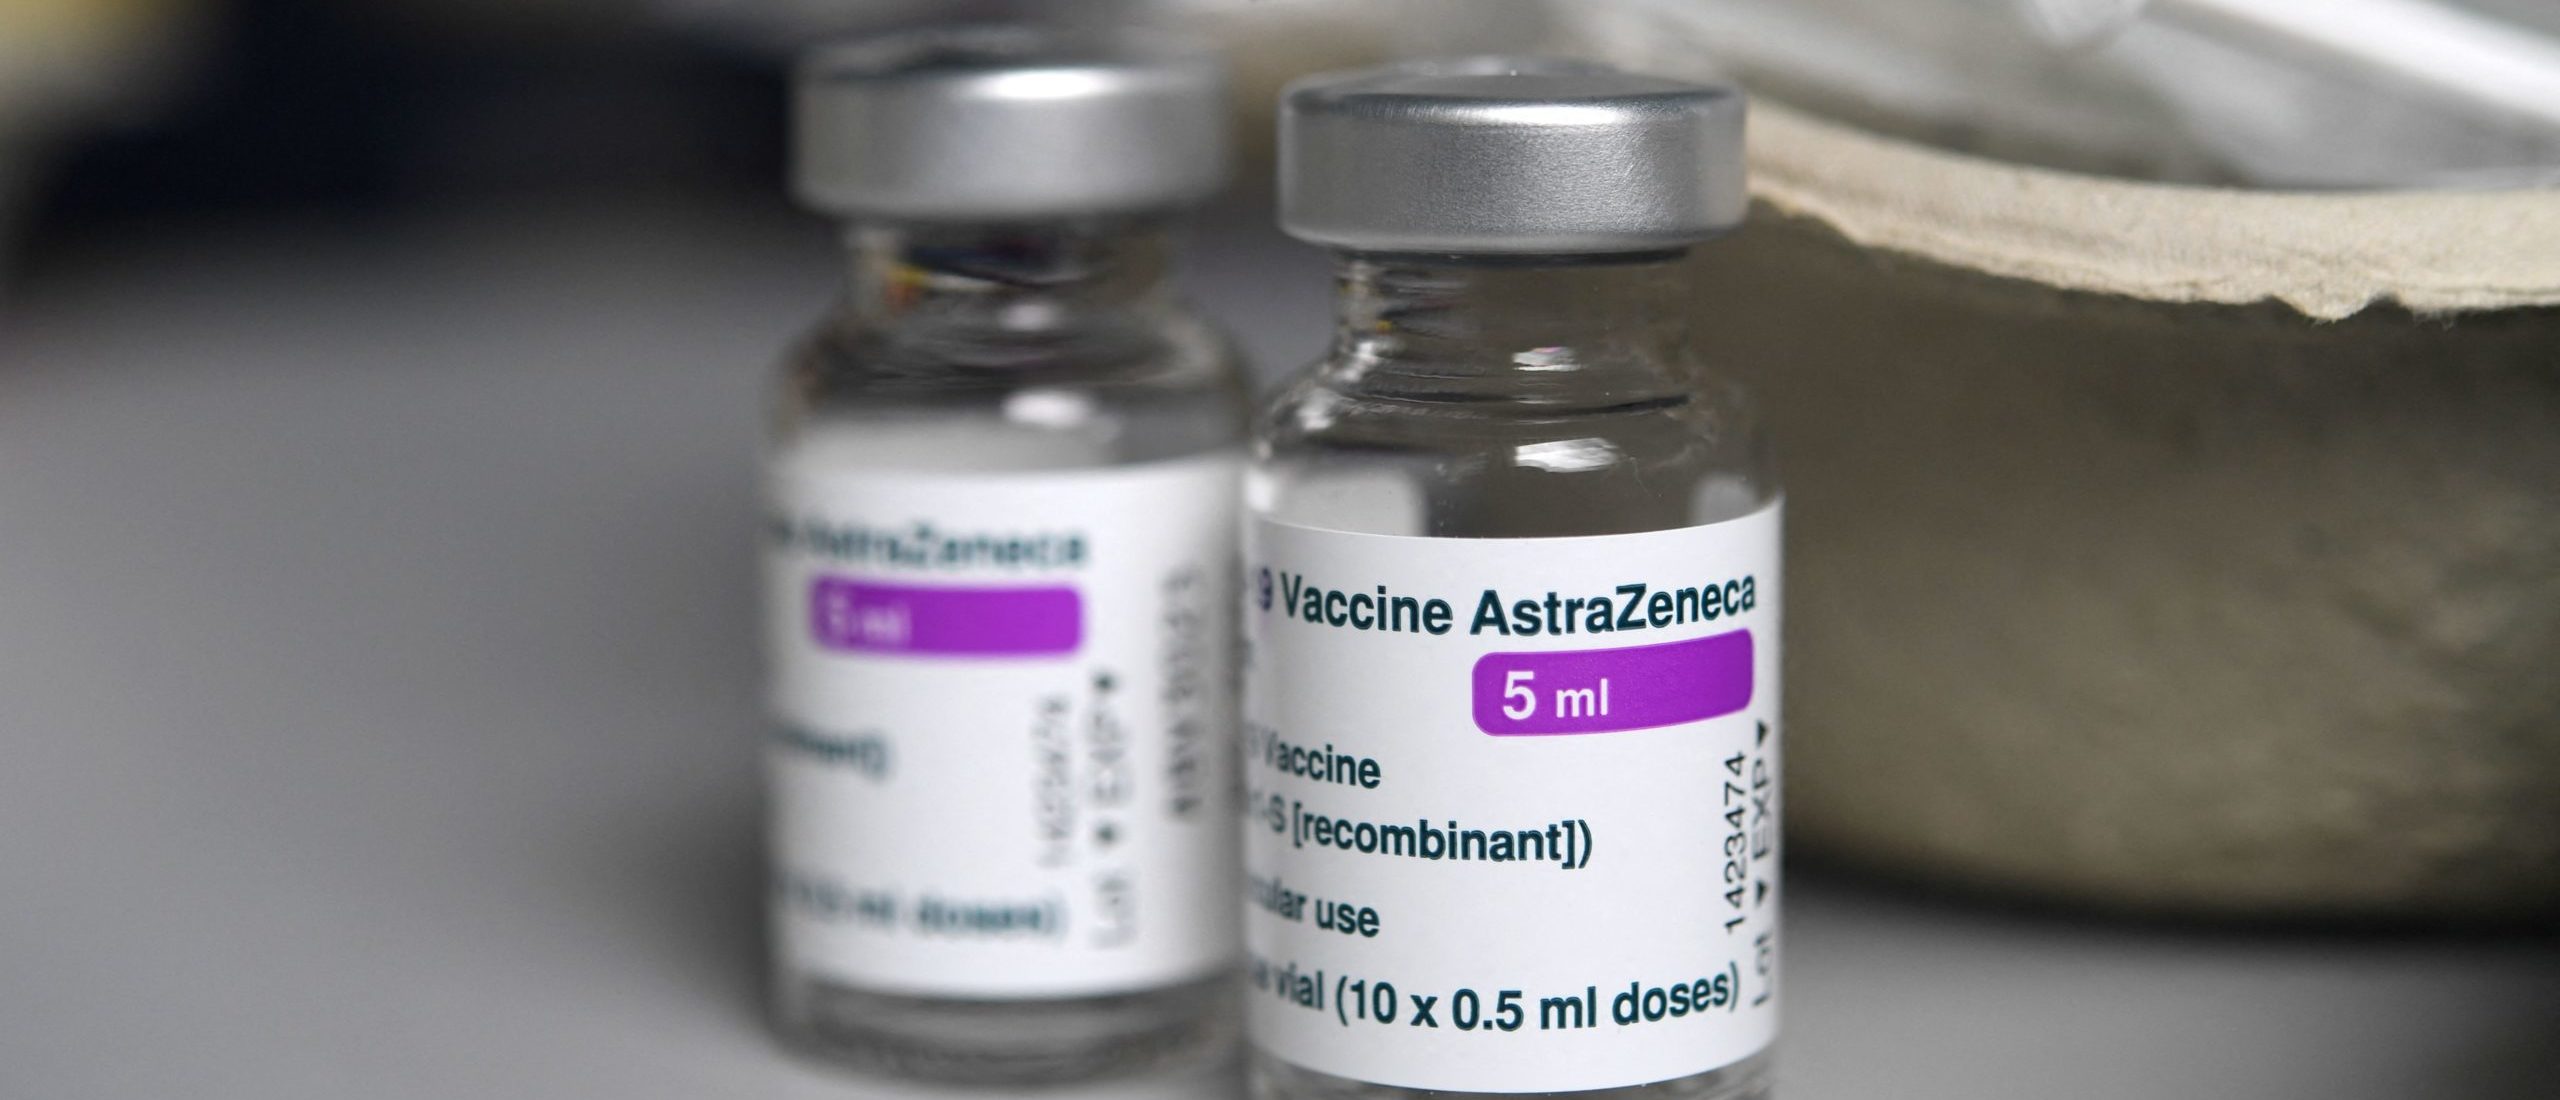 America has millions of doses of vaccine that it cannot use